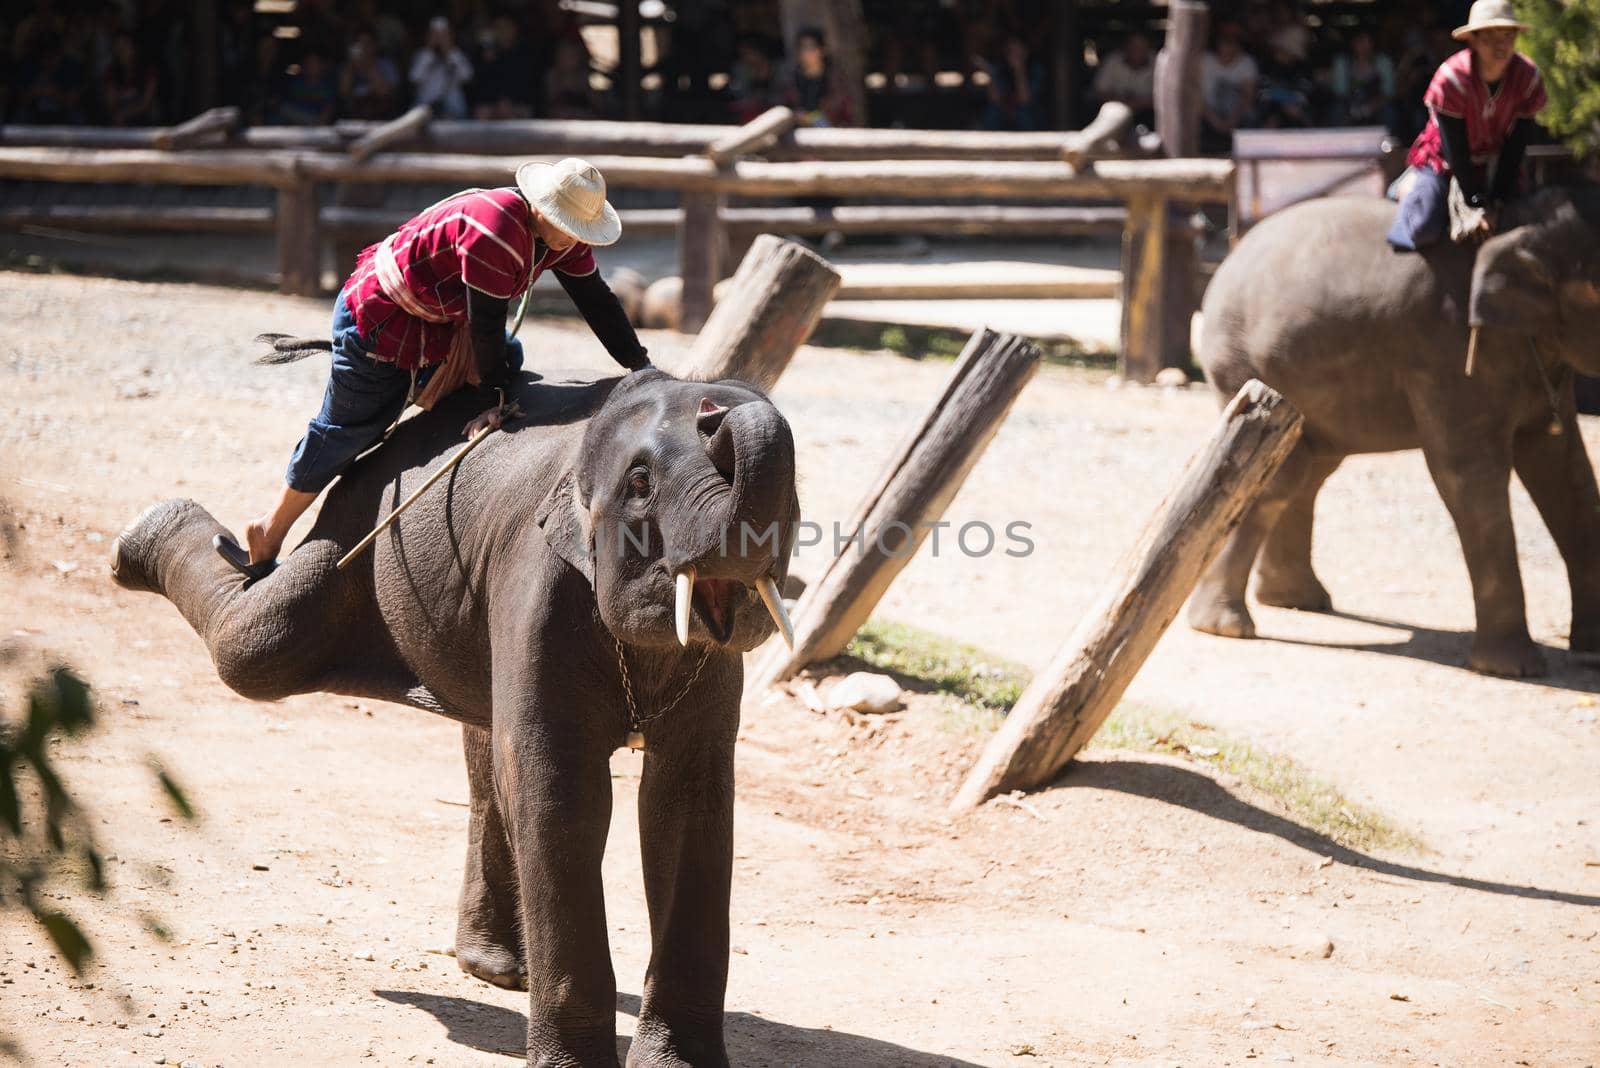 CHIANG MAI, THAILAND - JAN. 31: Daily elephant show at The Thai Elephant Conservation Center, mahout show how to ride and transport in forest, January 31, 2016 in Chiang Mai, Thailand.